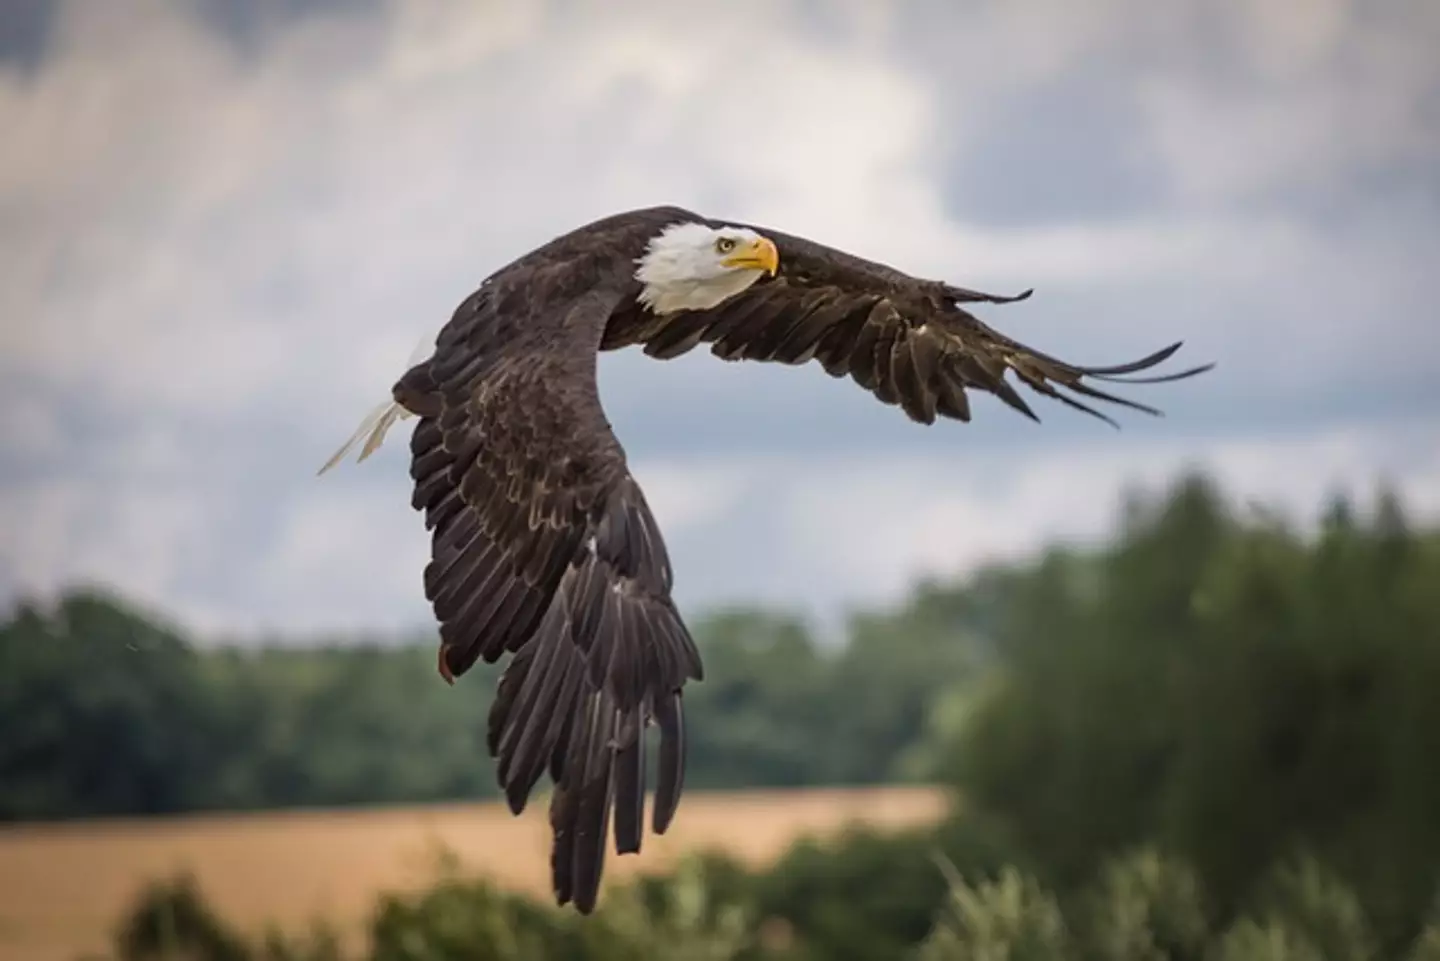 Bald eagles typically eat fish but have been known to hunt birds such as geese when their usual hunting spots freeze over.